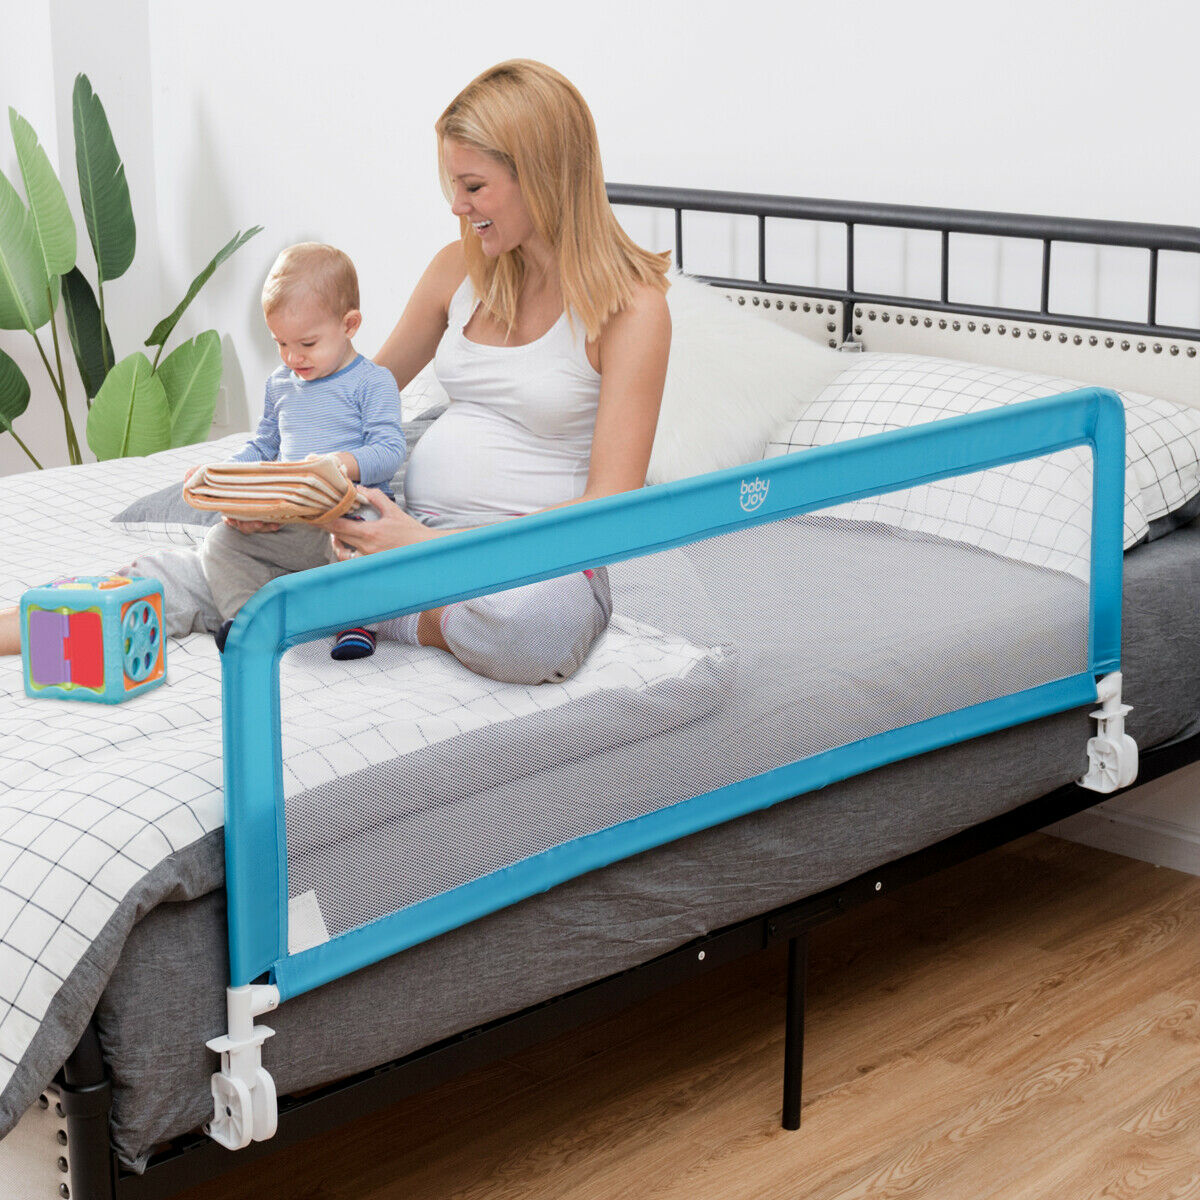 Stainless Steel Folding Safety Bed Guard Swing Down Bedrail for Convertible Crib Kids Twin Full Size Queen & King BABY JOY Toddlers Bed Rail Guard Double Blue, 59-Inch 